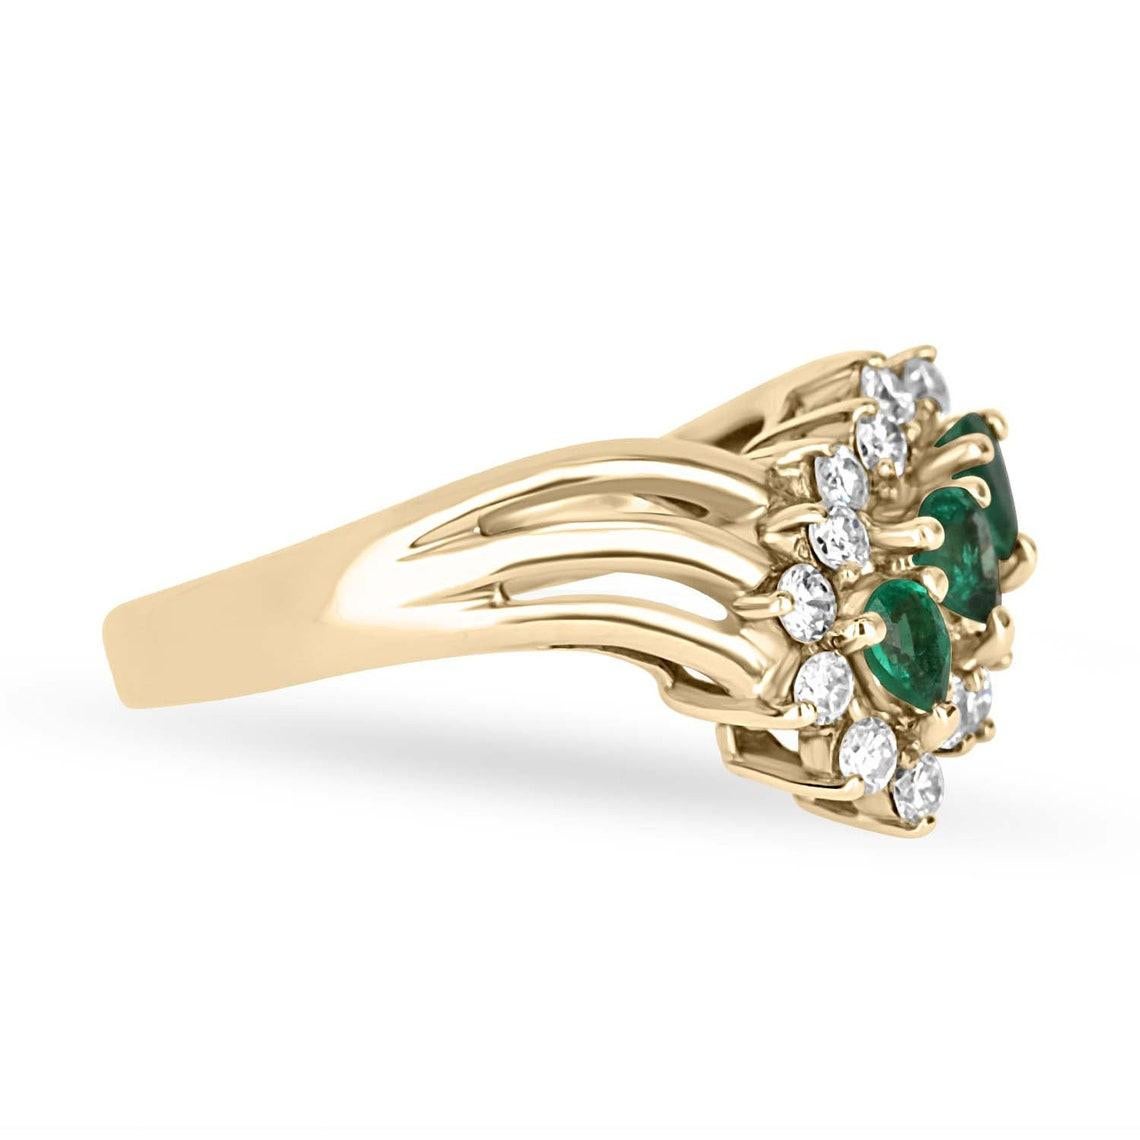 Displayed is a magnificent 3/4tcw natural Colombian emerald and diamond statement/right-hand ring. Three, pear emerald gemstones are delicately placed in the center of the ring and portray the most beautiful green color. The emeralds have excellent